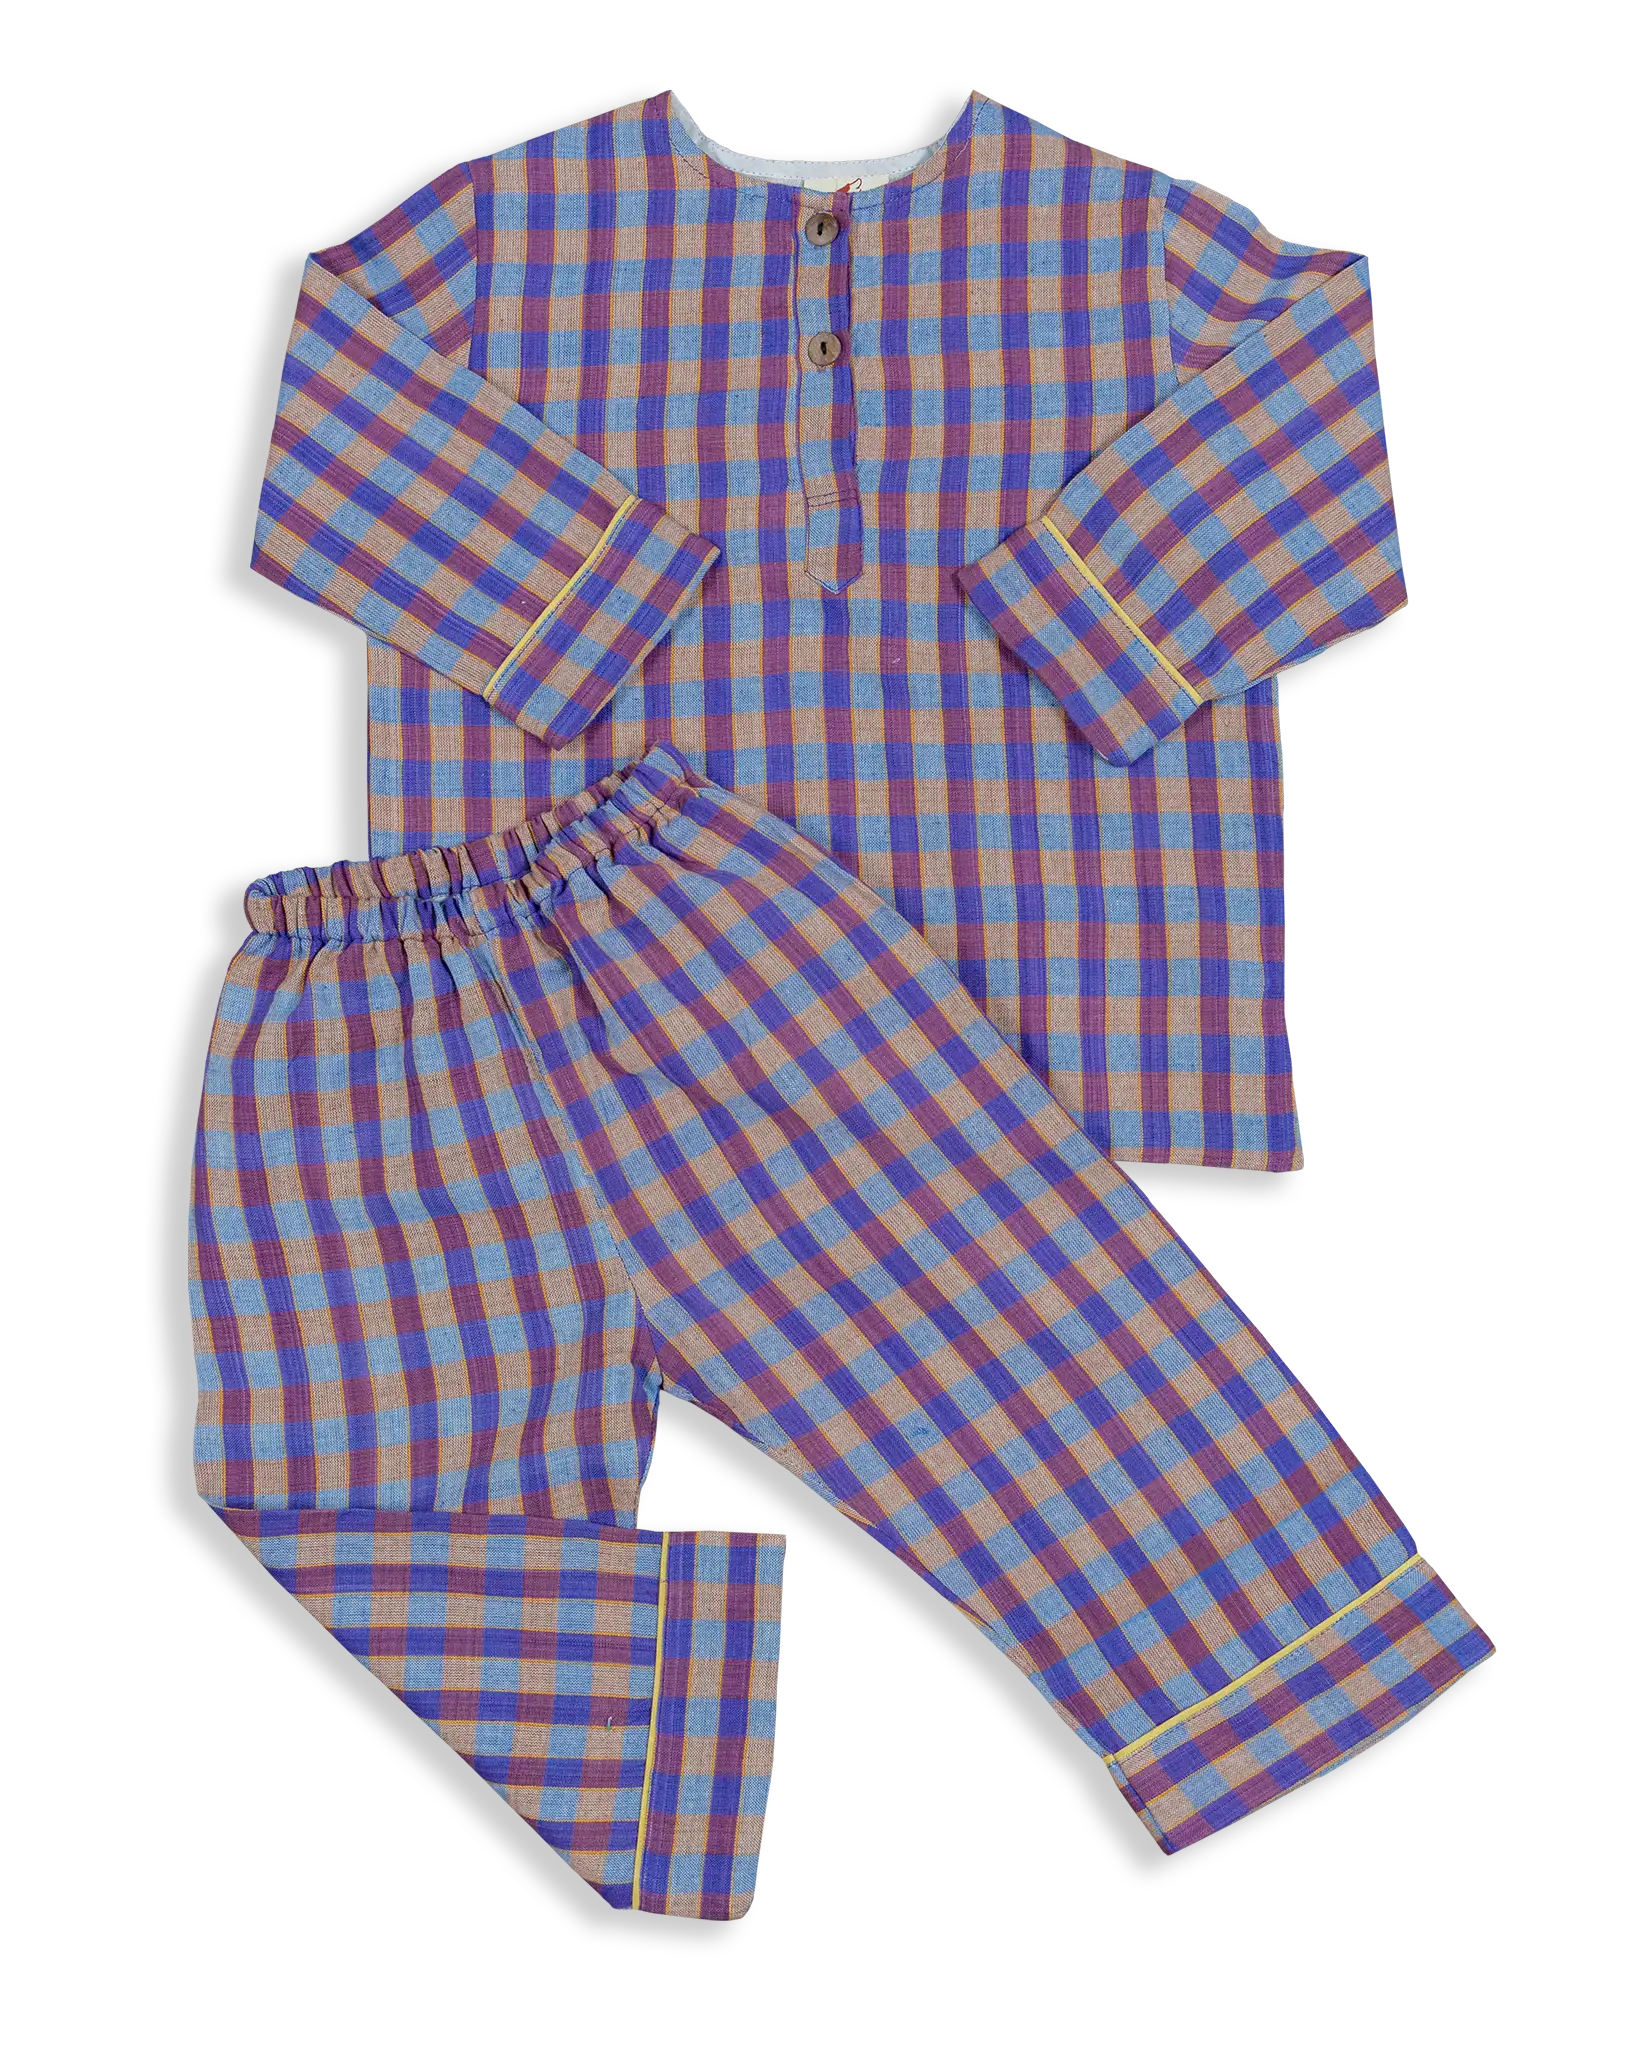 These classic cotton checkered Pyjamas are some of our best selling products. Designed and woven here in Nepal they are made with the finest voile lining. It is also known as cotton cashmere, well known and used for kids wear due to the softness and its breathable nature.